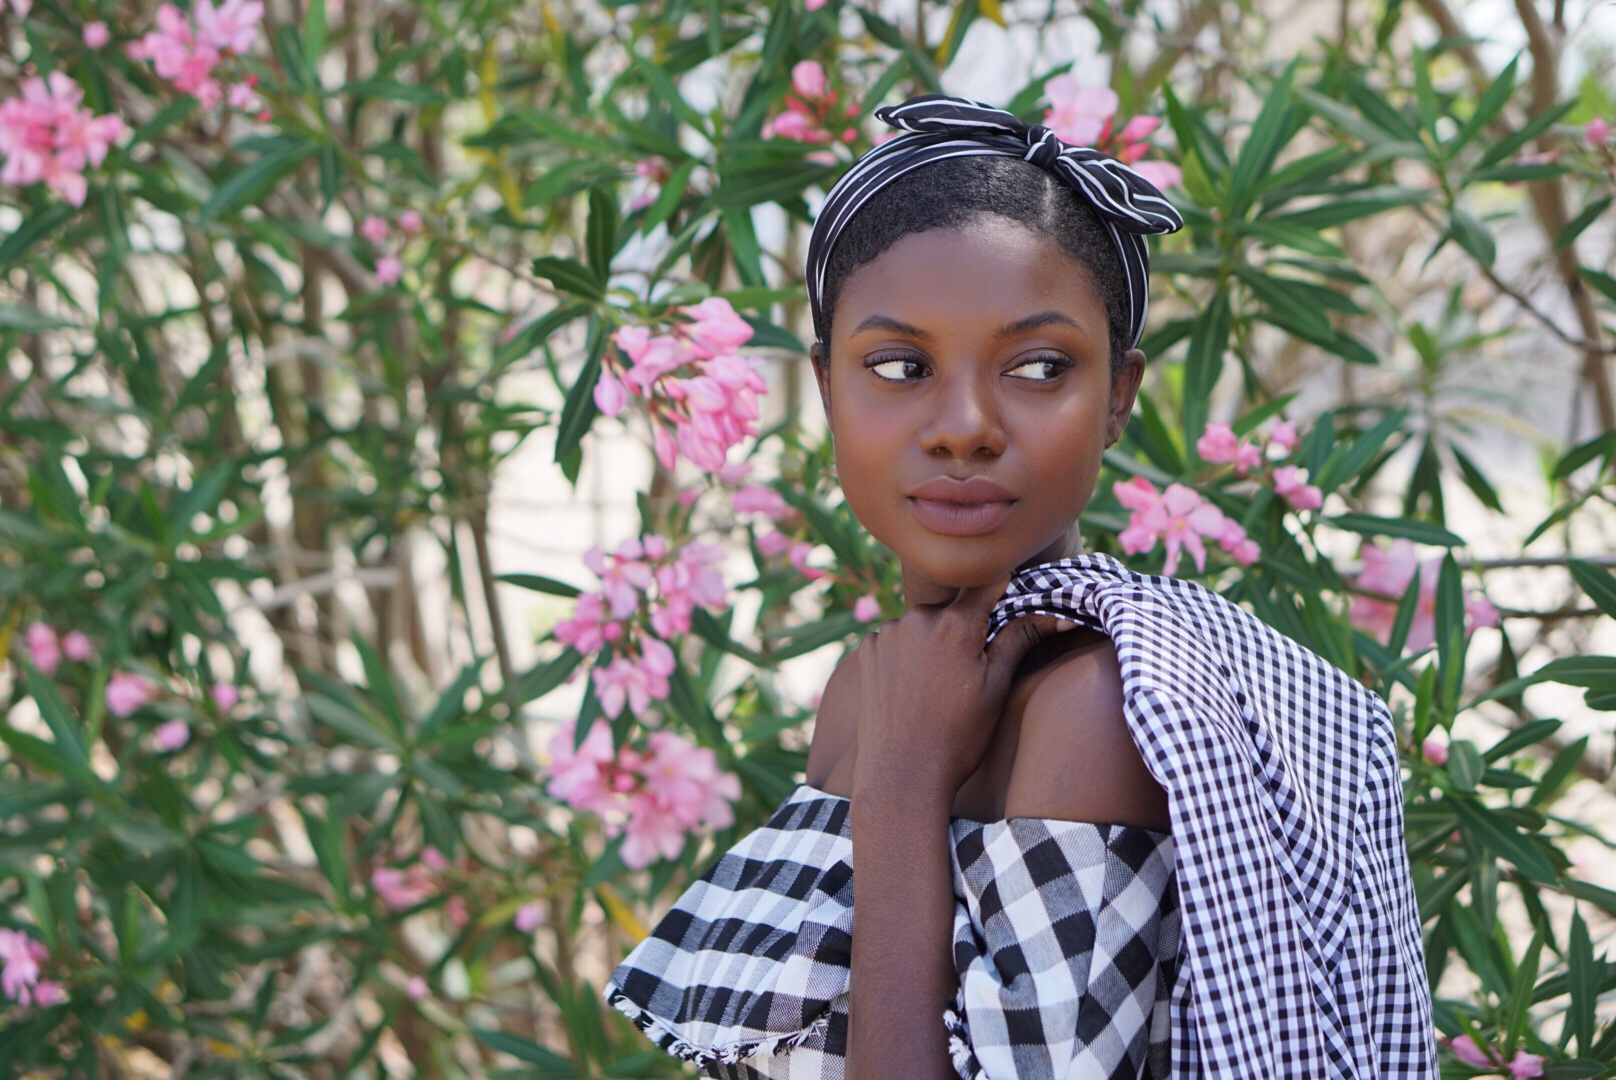 twa, short natural hair styles, 4b hair, 4c hair, nude lip color for brown girls, gingham dress, ann taylor dress, off the shoulder dress, summer trends, beauty photography, floral beauty 